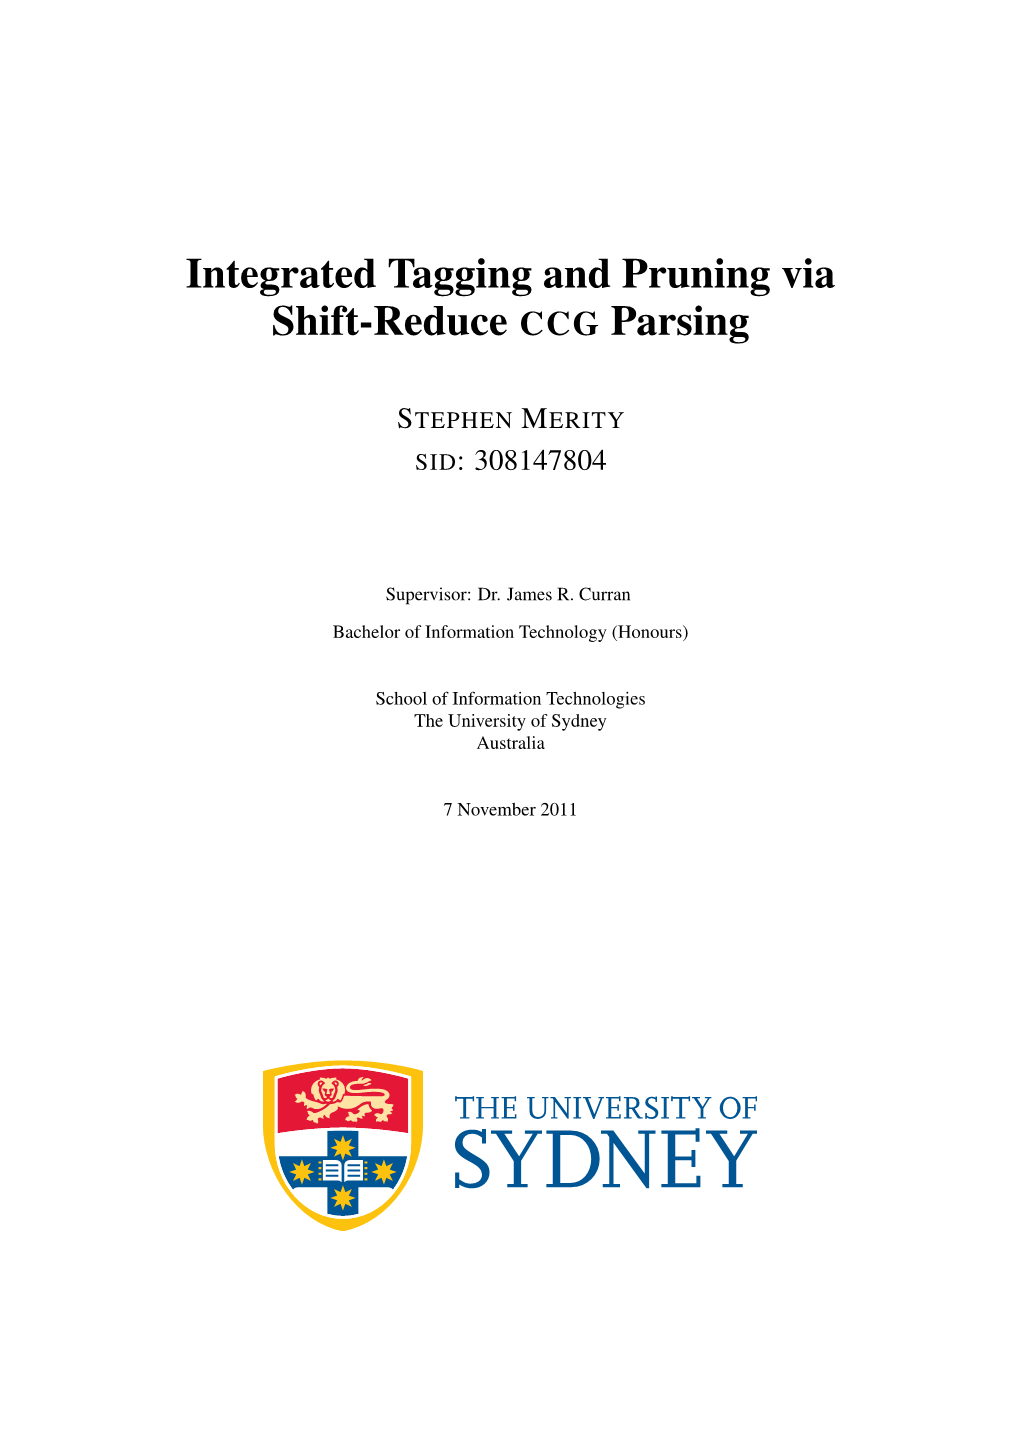 Integrated Tagging and Pruning Via Shift-Reduce CCG Parsing